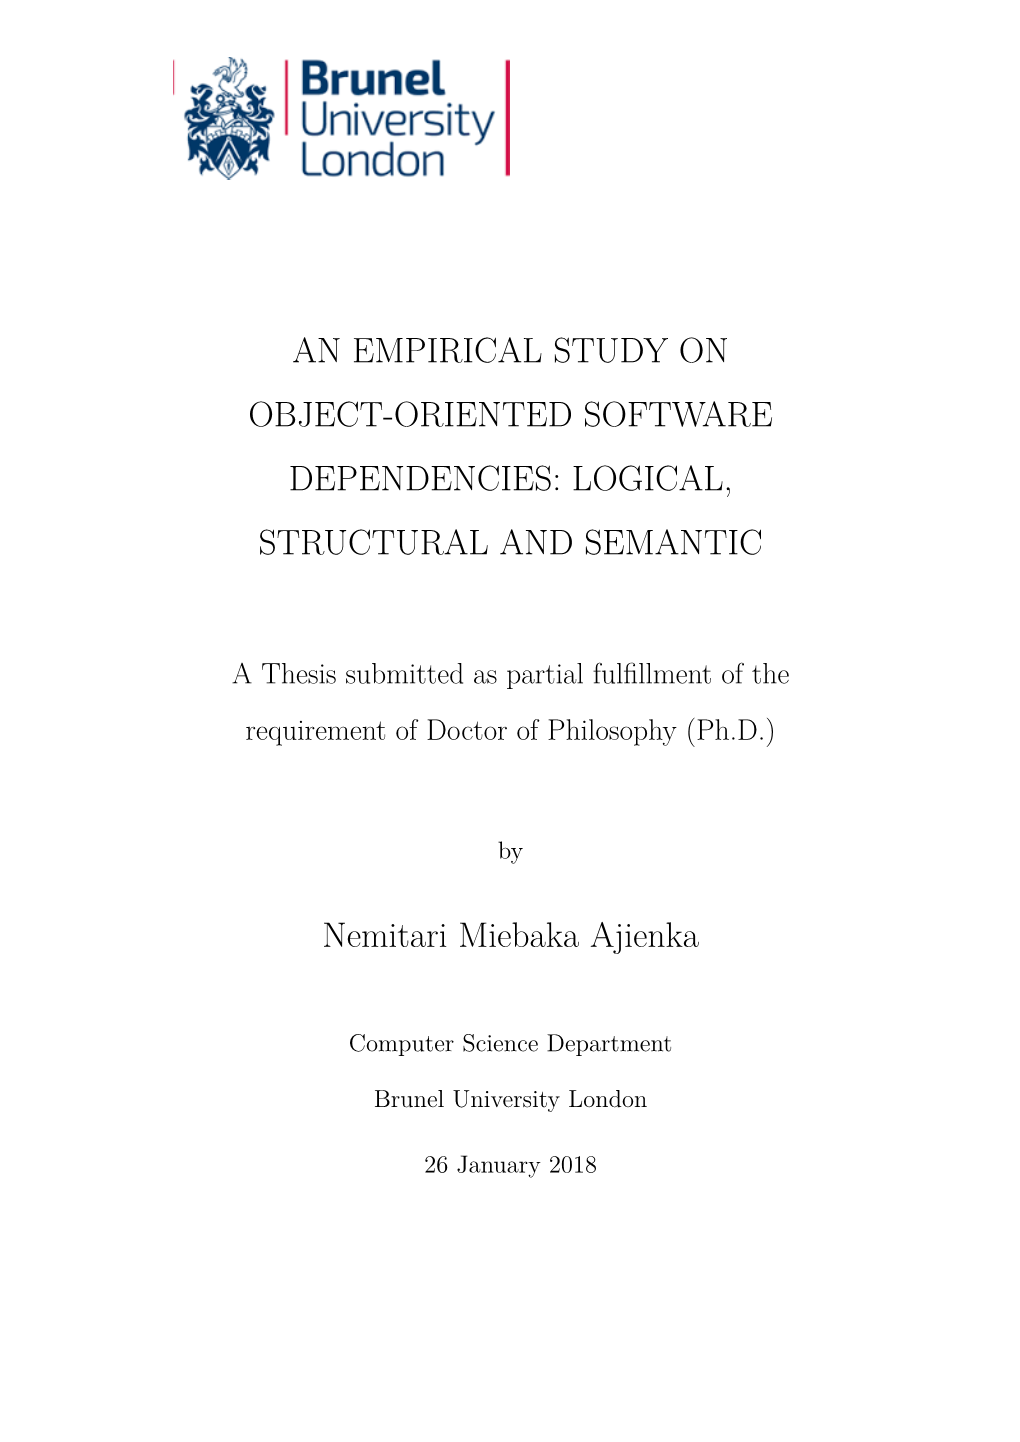 An Empirical Study on Object-Oriented Software Dependencies: Logical, Structural and Semantic